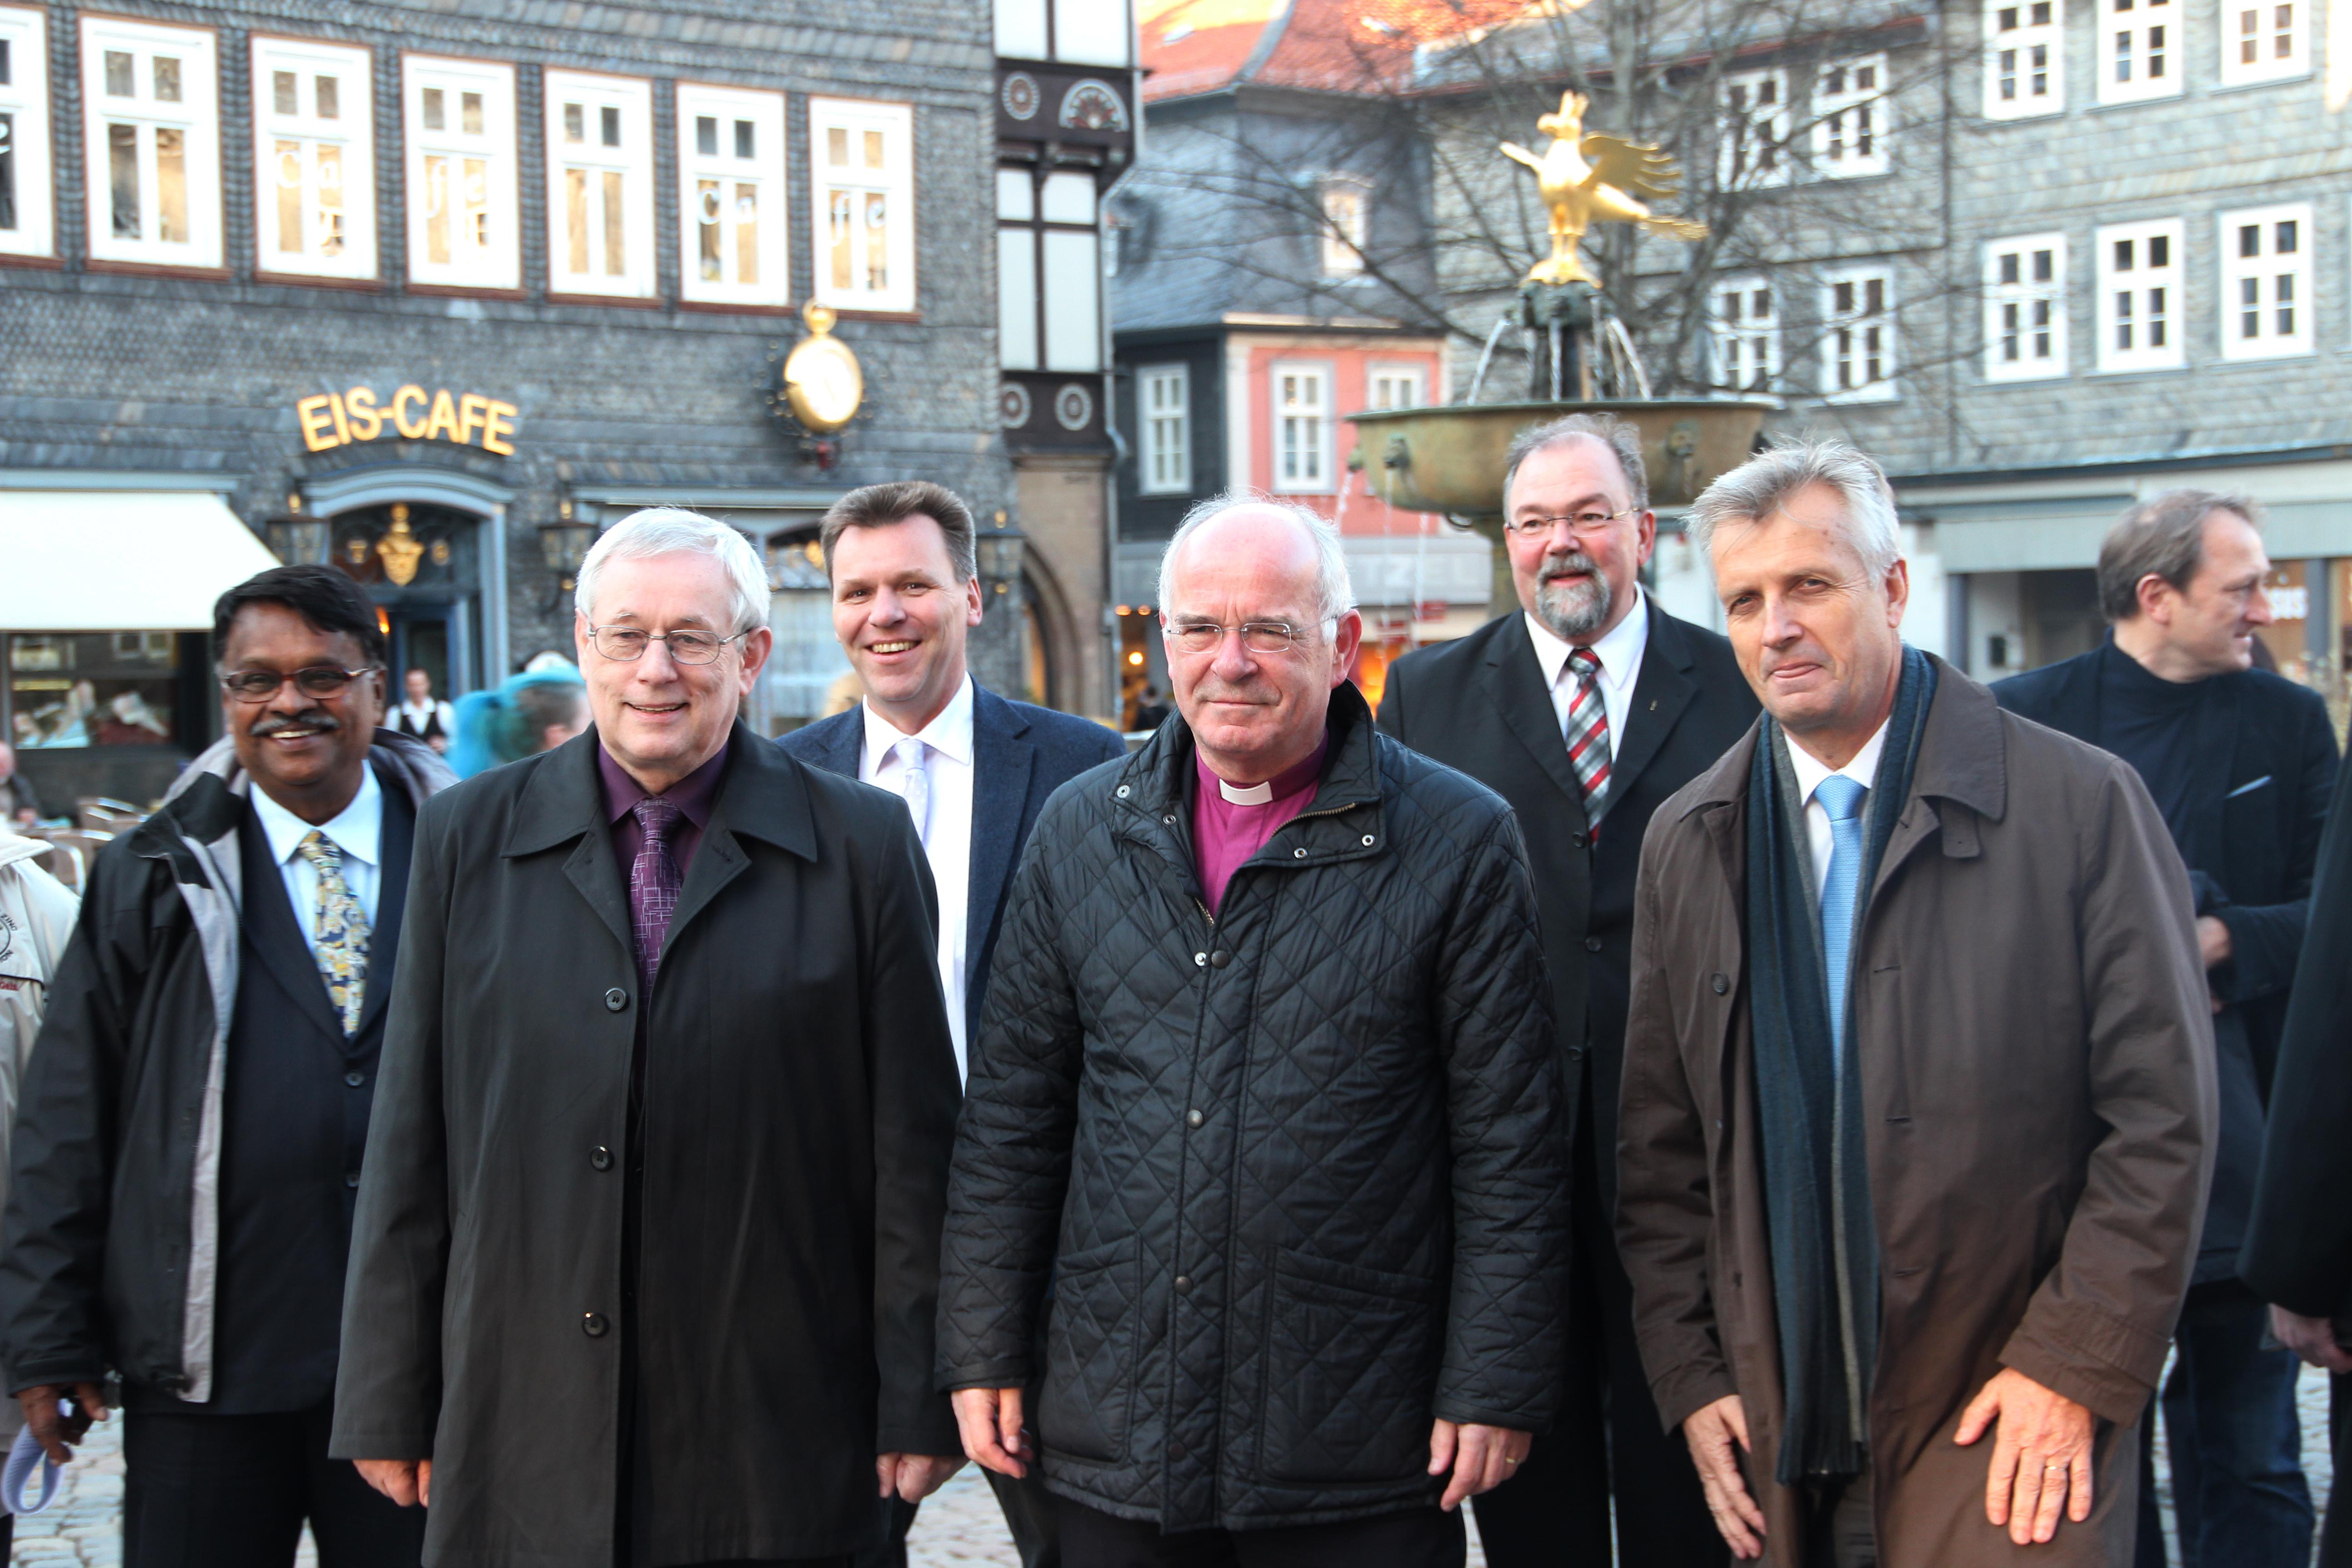 LWF General Secretary Rev. Martin Junge (right) with the Bishop of Brunswick Prof. Dr. Friedrich Weber (center), Jan Waclawek (left), Bishop of the Silesian Evangelical Church of the Augsburg Confession in the Czech Republic, and other guests during the walk through the city of Goslar. Photo: DNK/LWF. HÃ¼bner 